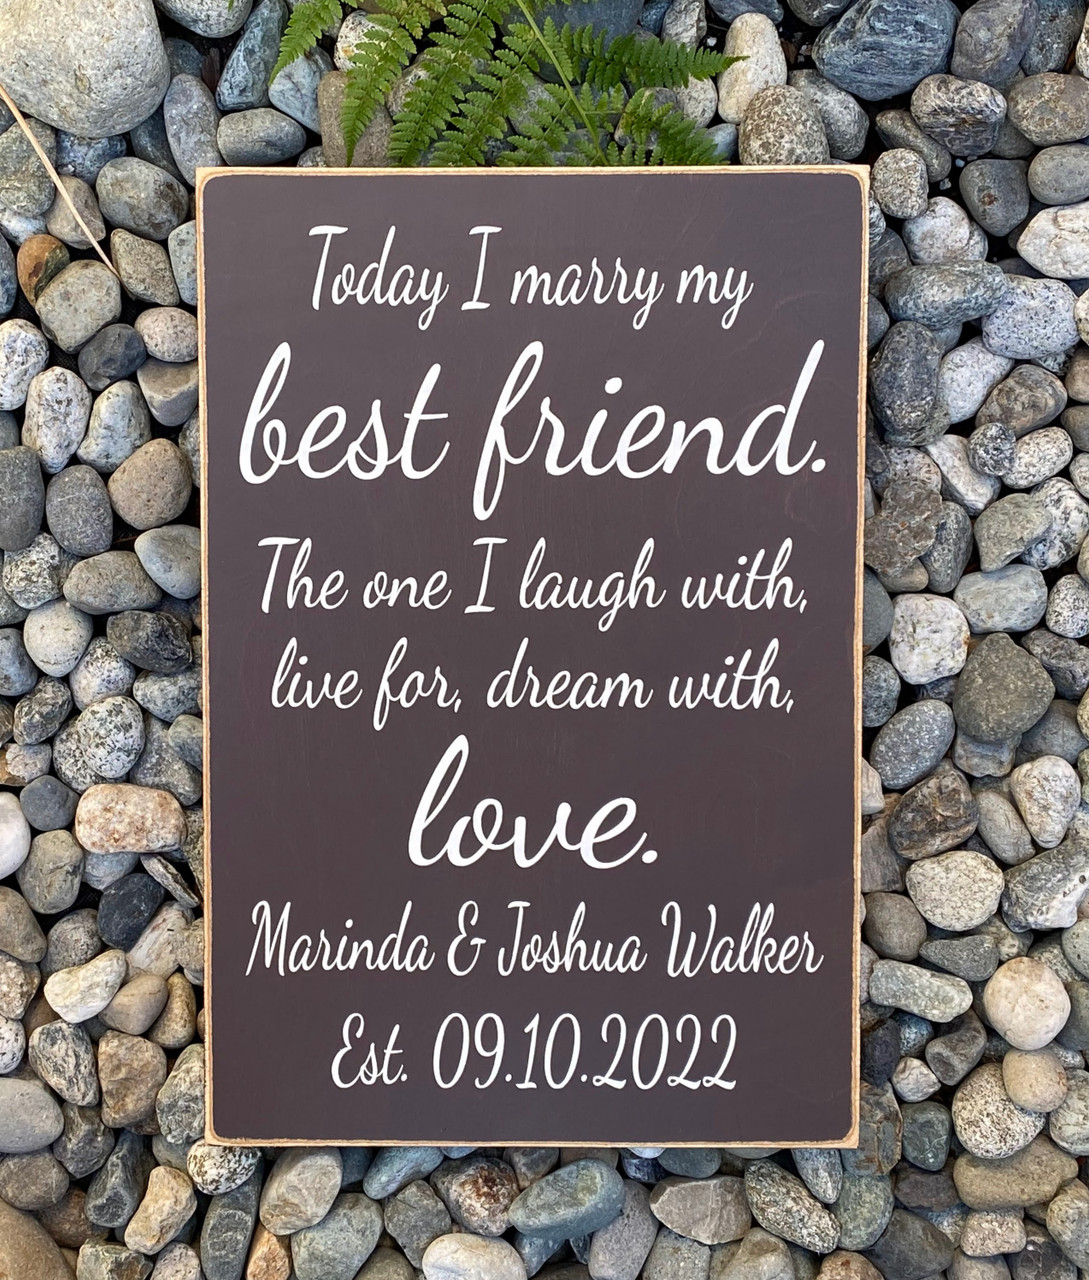 Today I marry my best friend - personalized wood sign